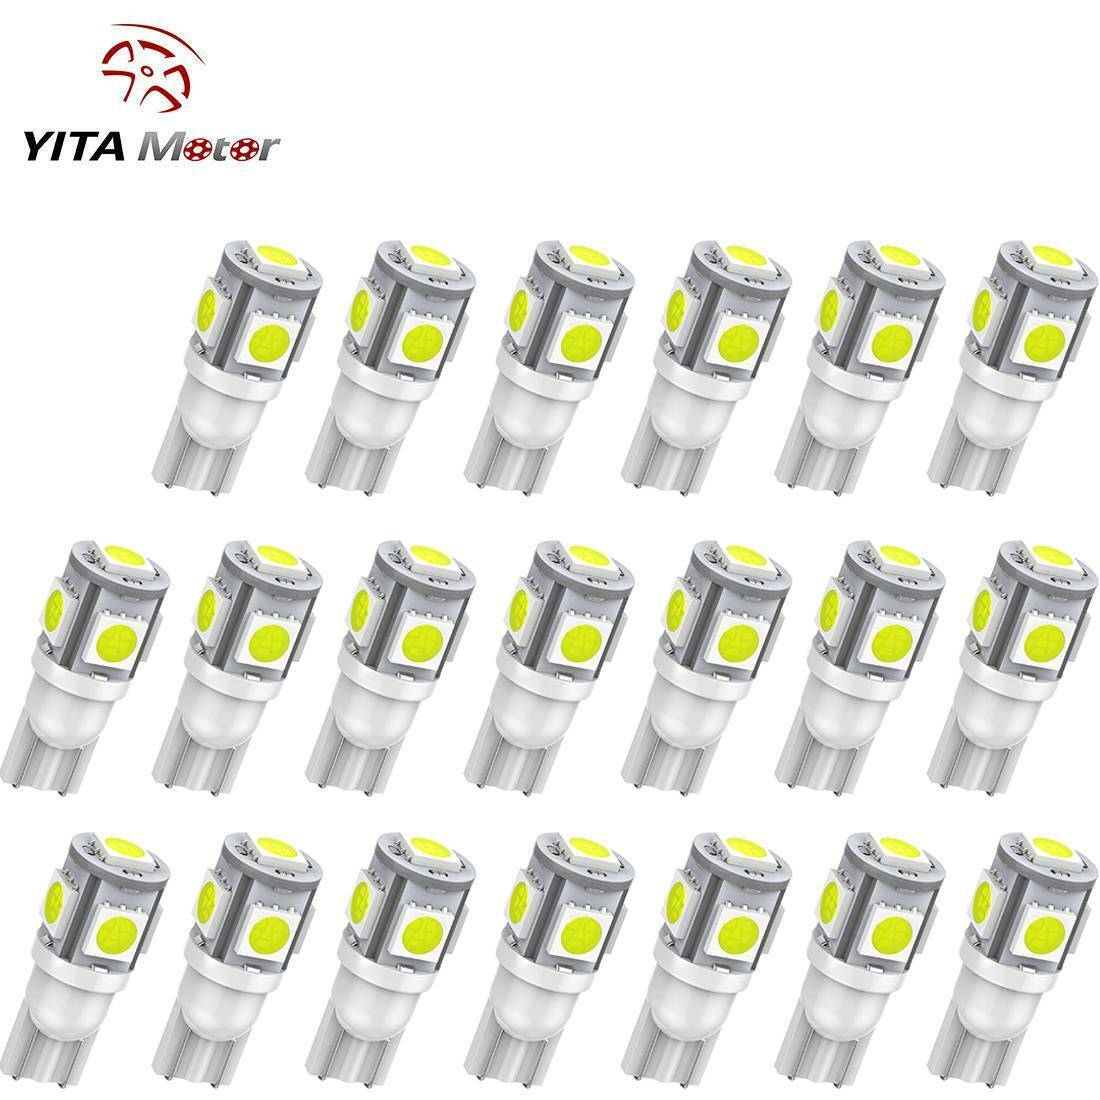 YITAMOTOR 20PCS 6000K White T10 921 5SMD Interior License Plate Dome Light Bulb